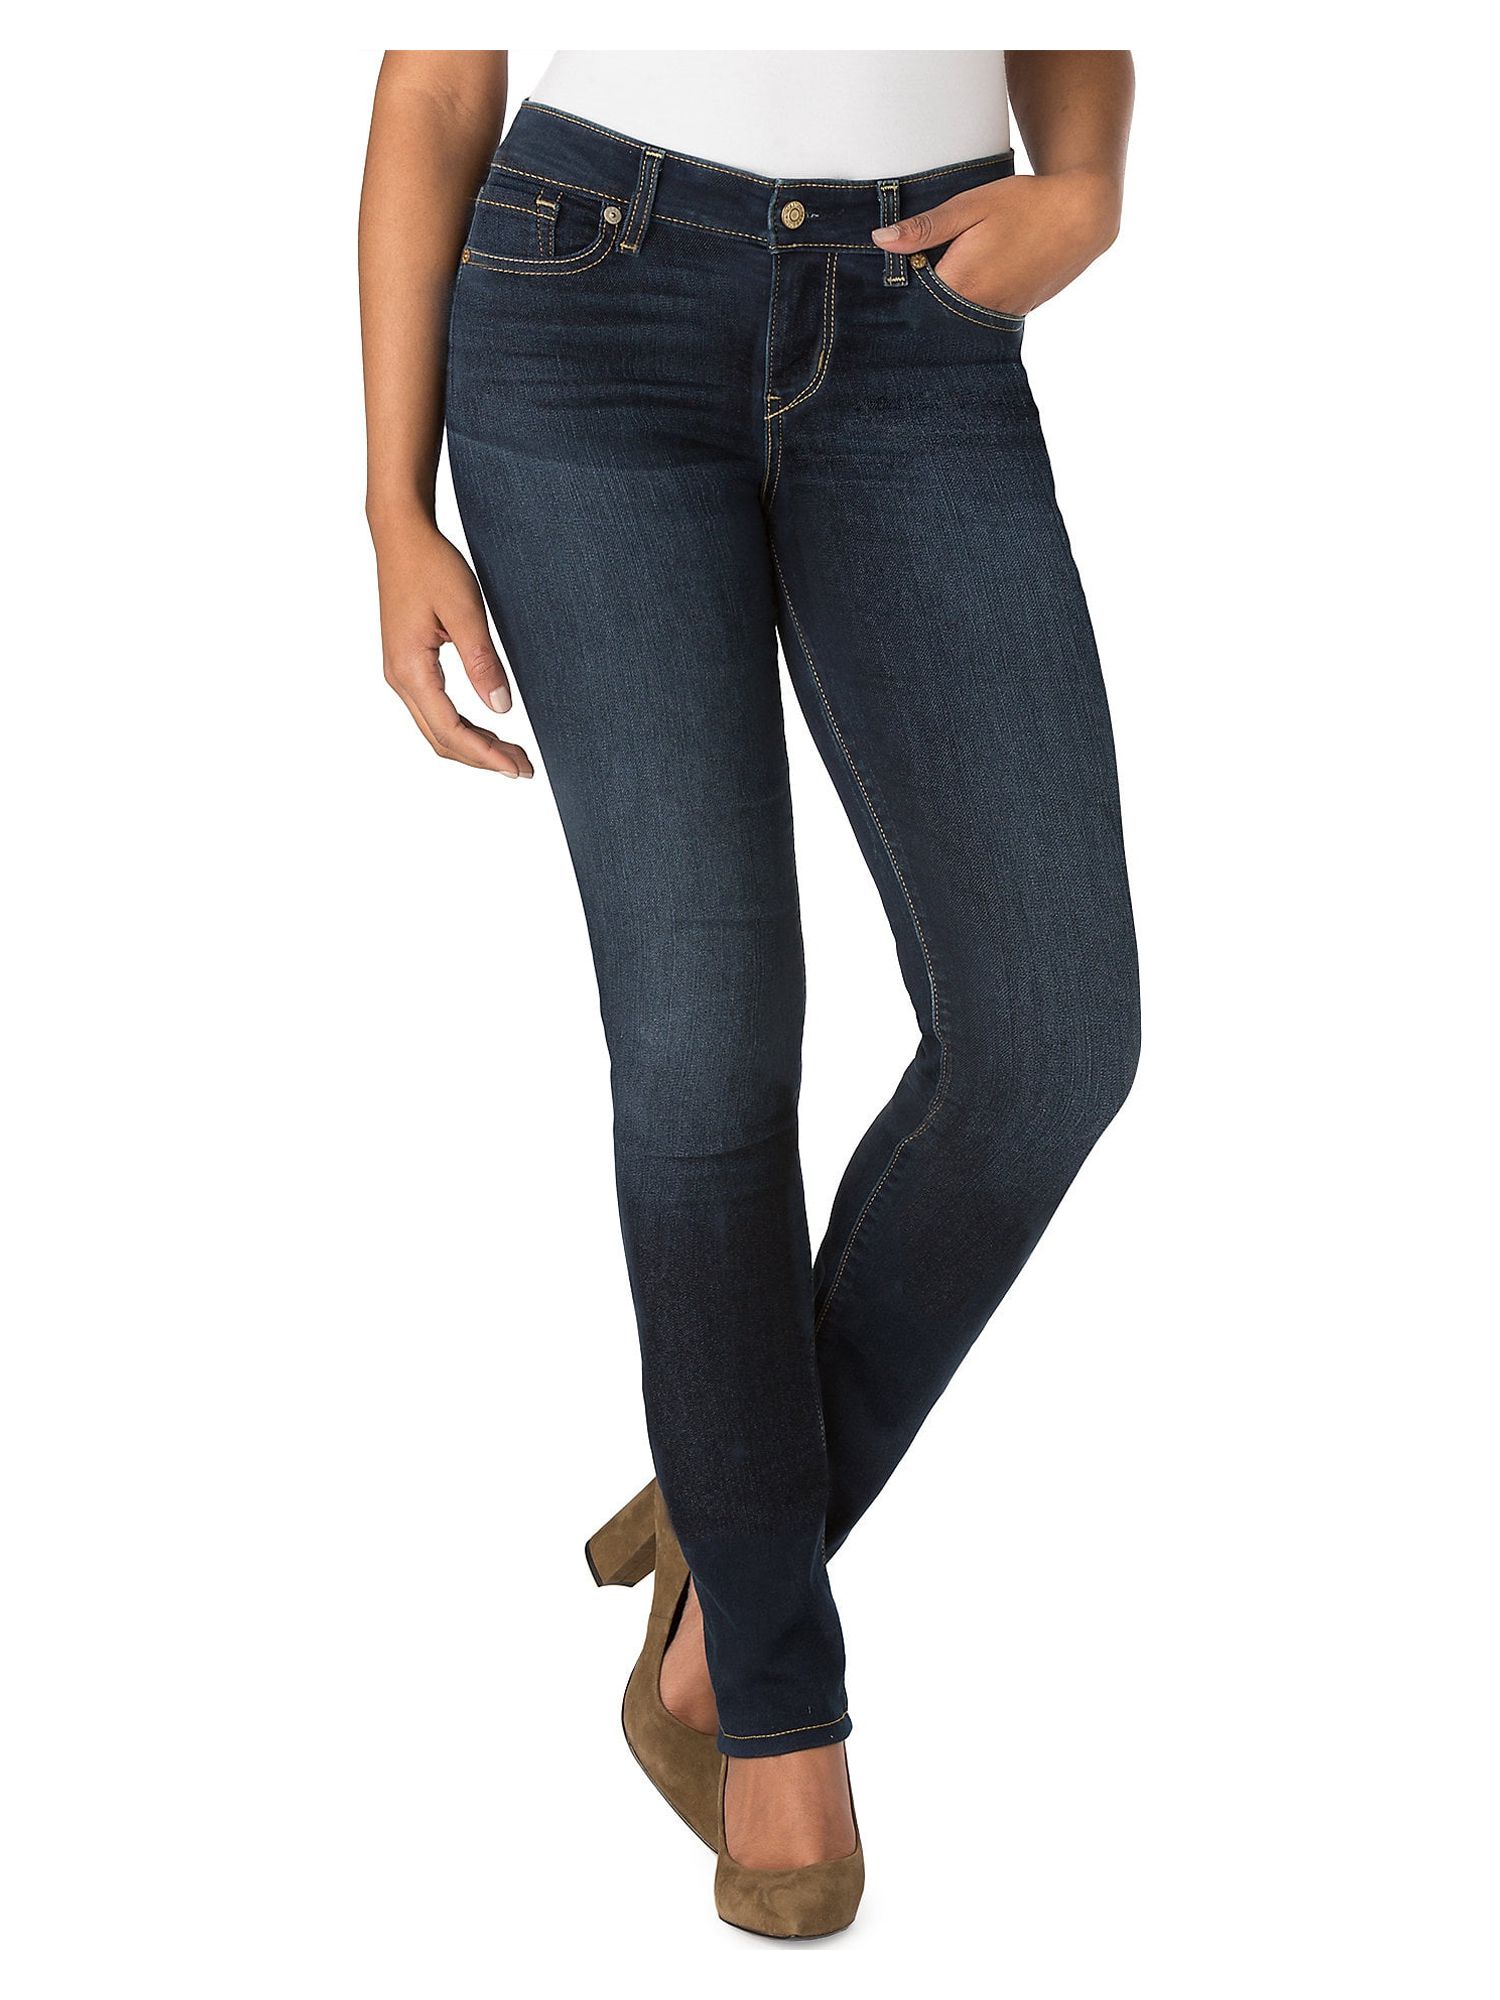 Signature by Levi Strauss & Co. Women's Modern Mid-Rise Straight Jeans - image 1 of 9